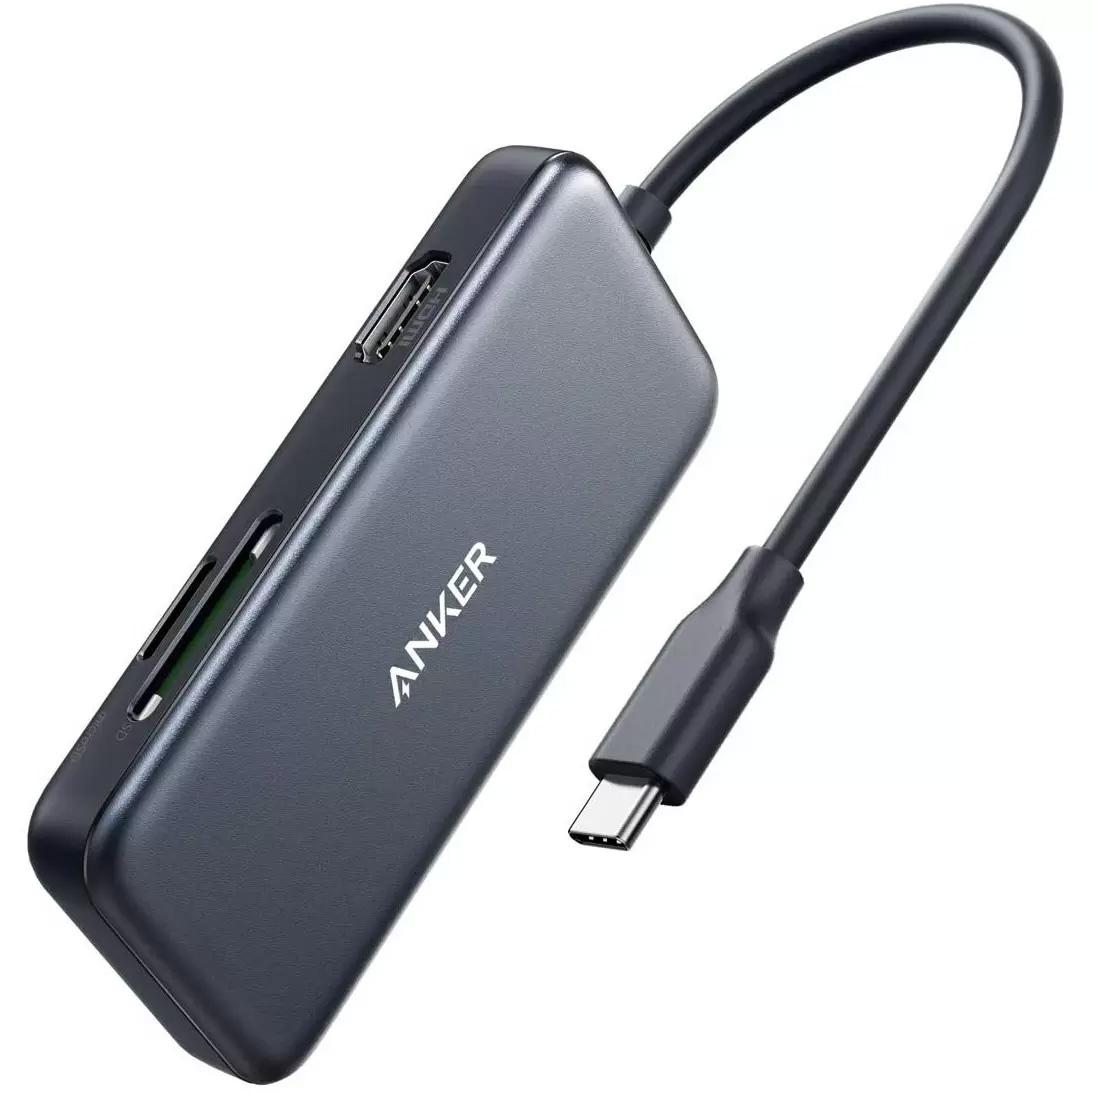 Anker 5-in-1 USB C Hub with HDMI and Card Reader for $19.99